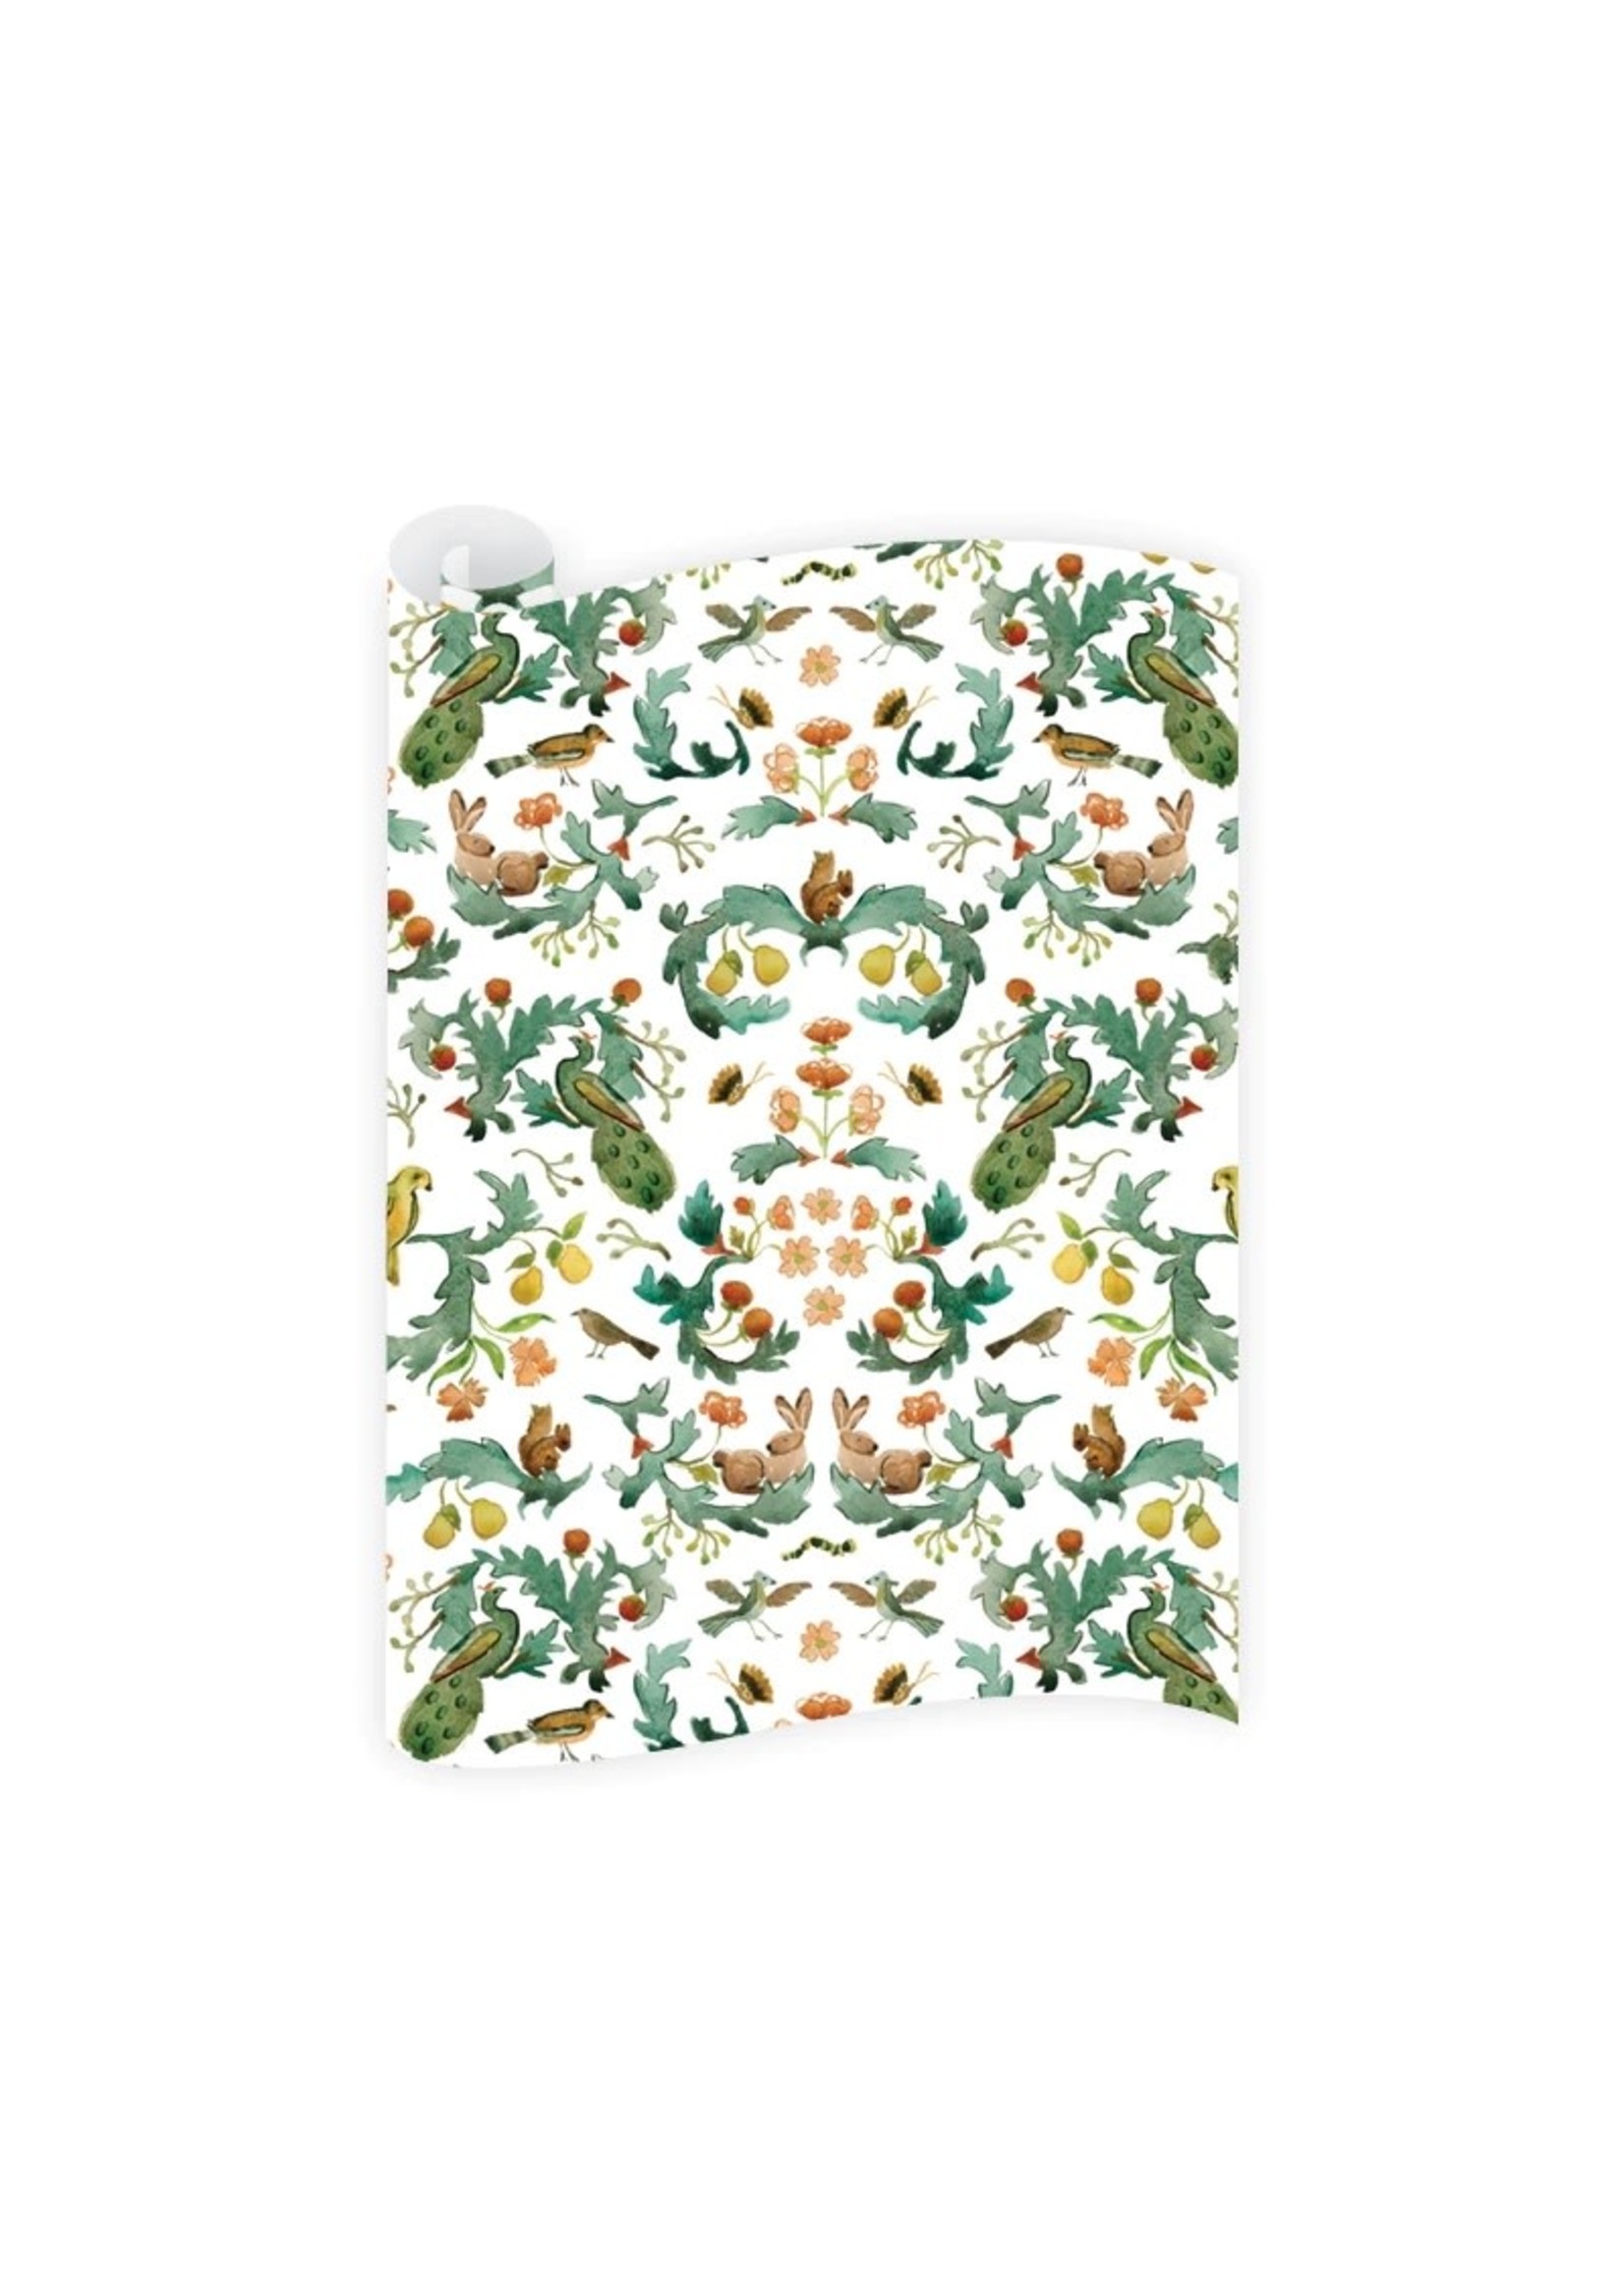 Dogwood Hill Gift Wrap Sheets - Garden Tapestry (3 sheets)